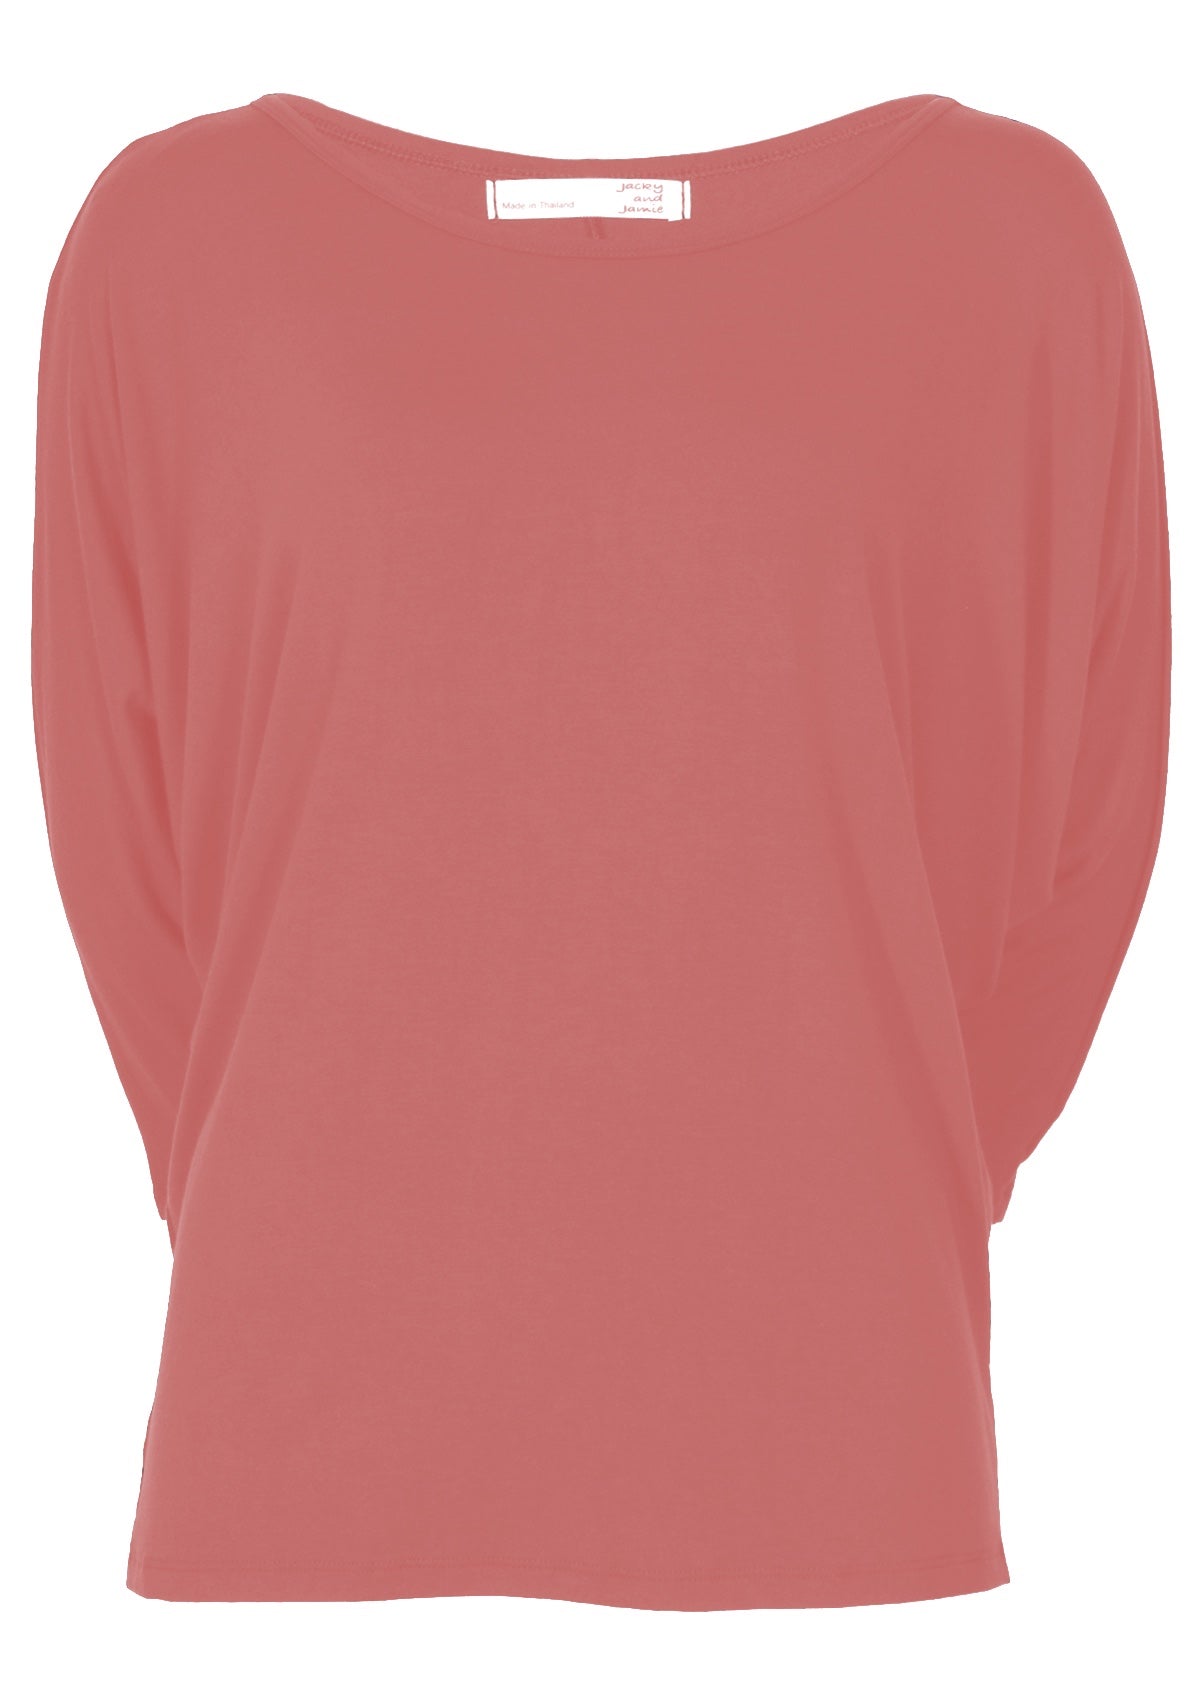 soft stretch rayon long sleeve top pink